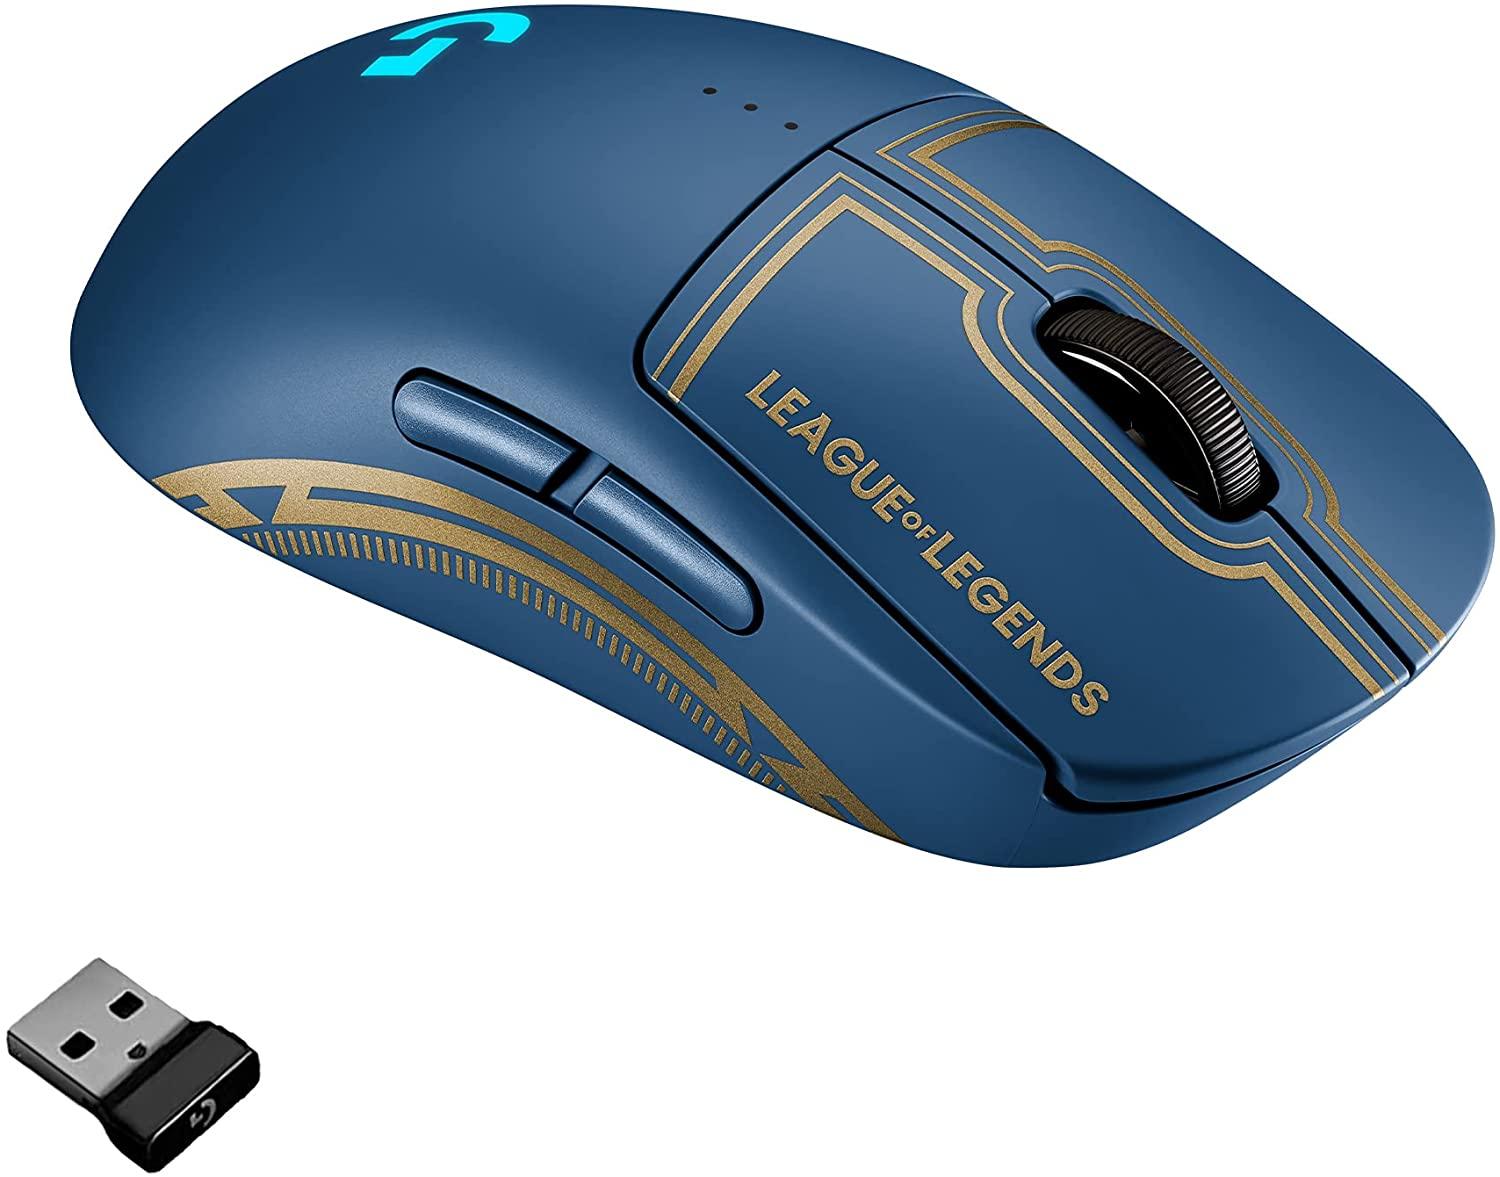 Logitech G PRO League of Legends Wireless Gaming Mouse for $89.99 Shipped